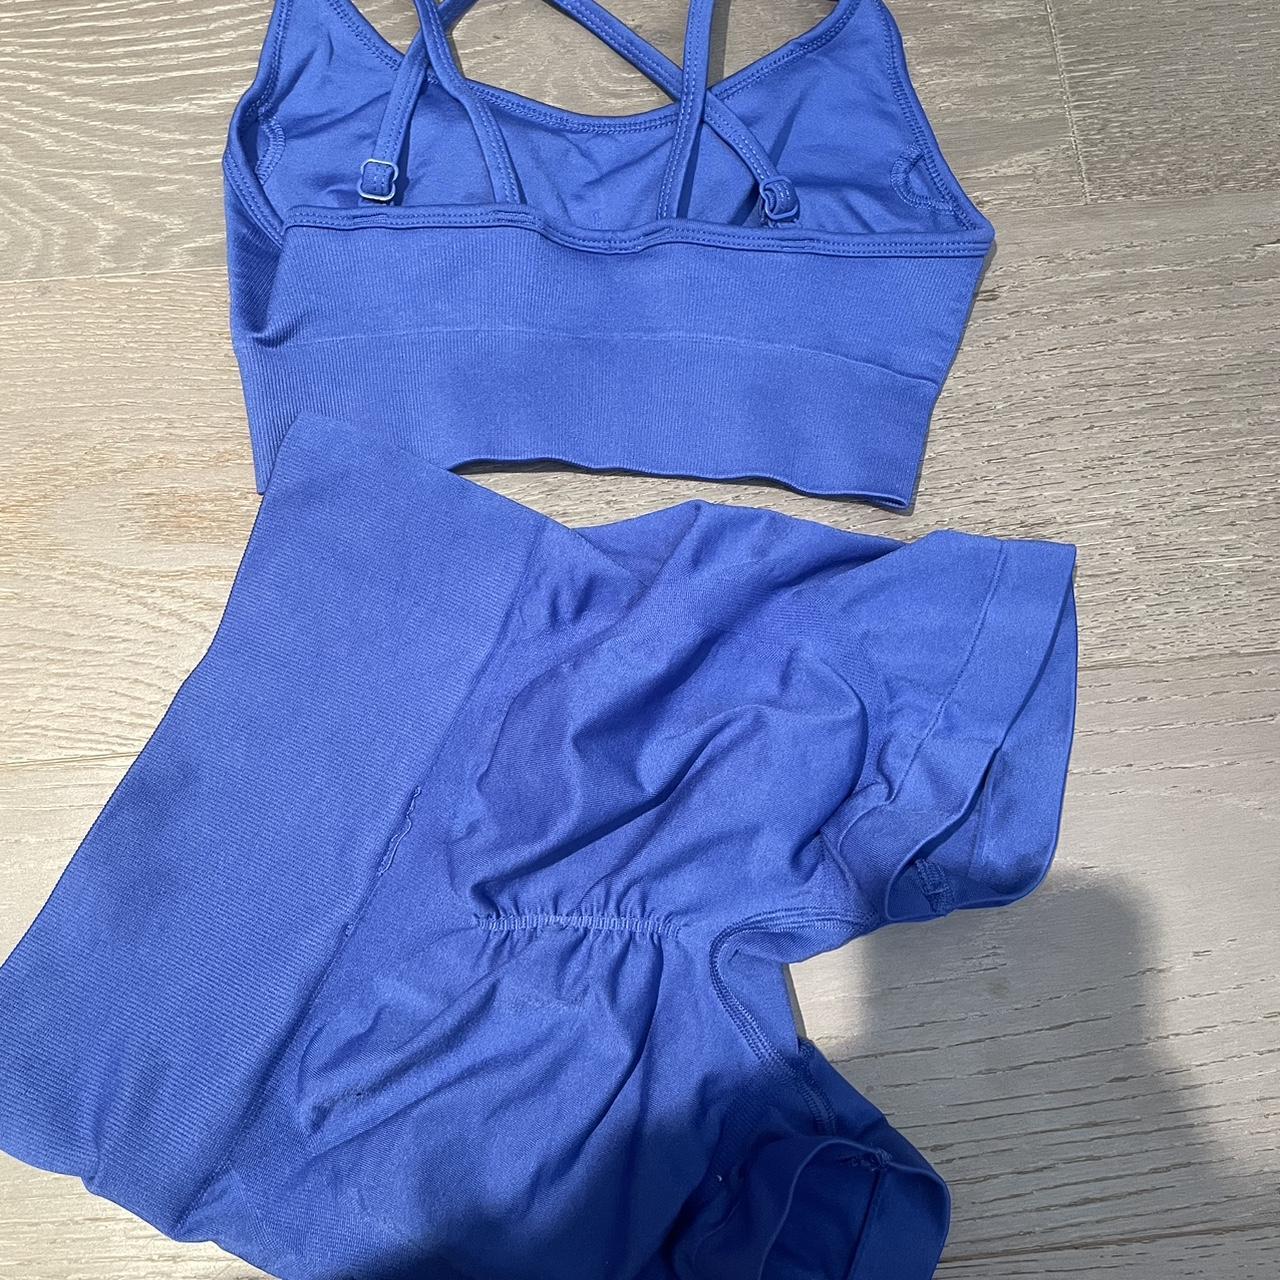 bo and tee workout set in size xsmall. has the most... - Depop